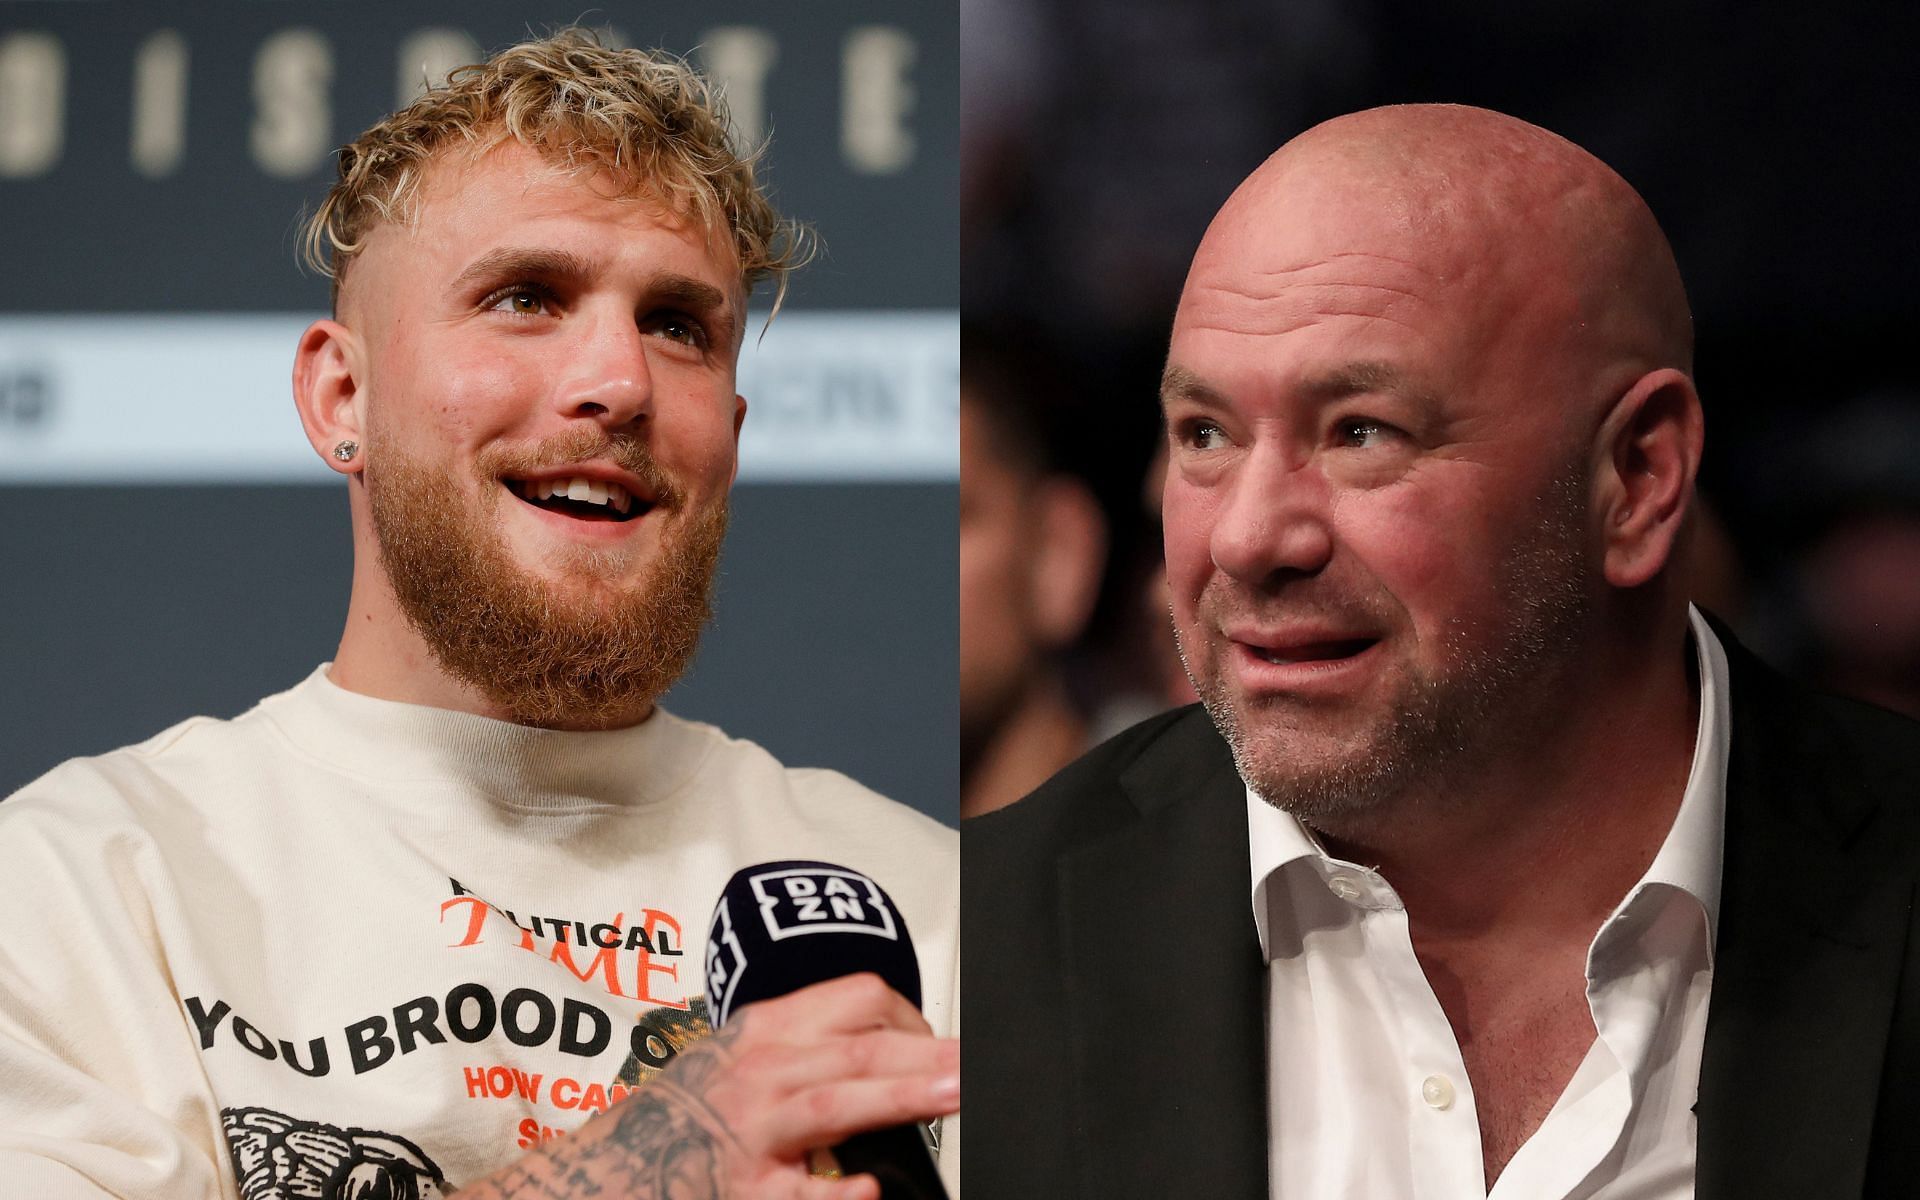 Jake Paul (L) took another dig at Dana White (R) on Twitter regarding the fighter pay situation in the UFC